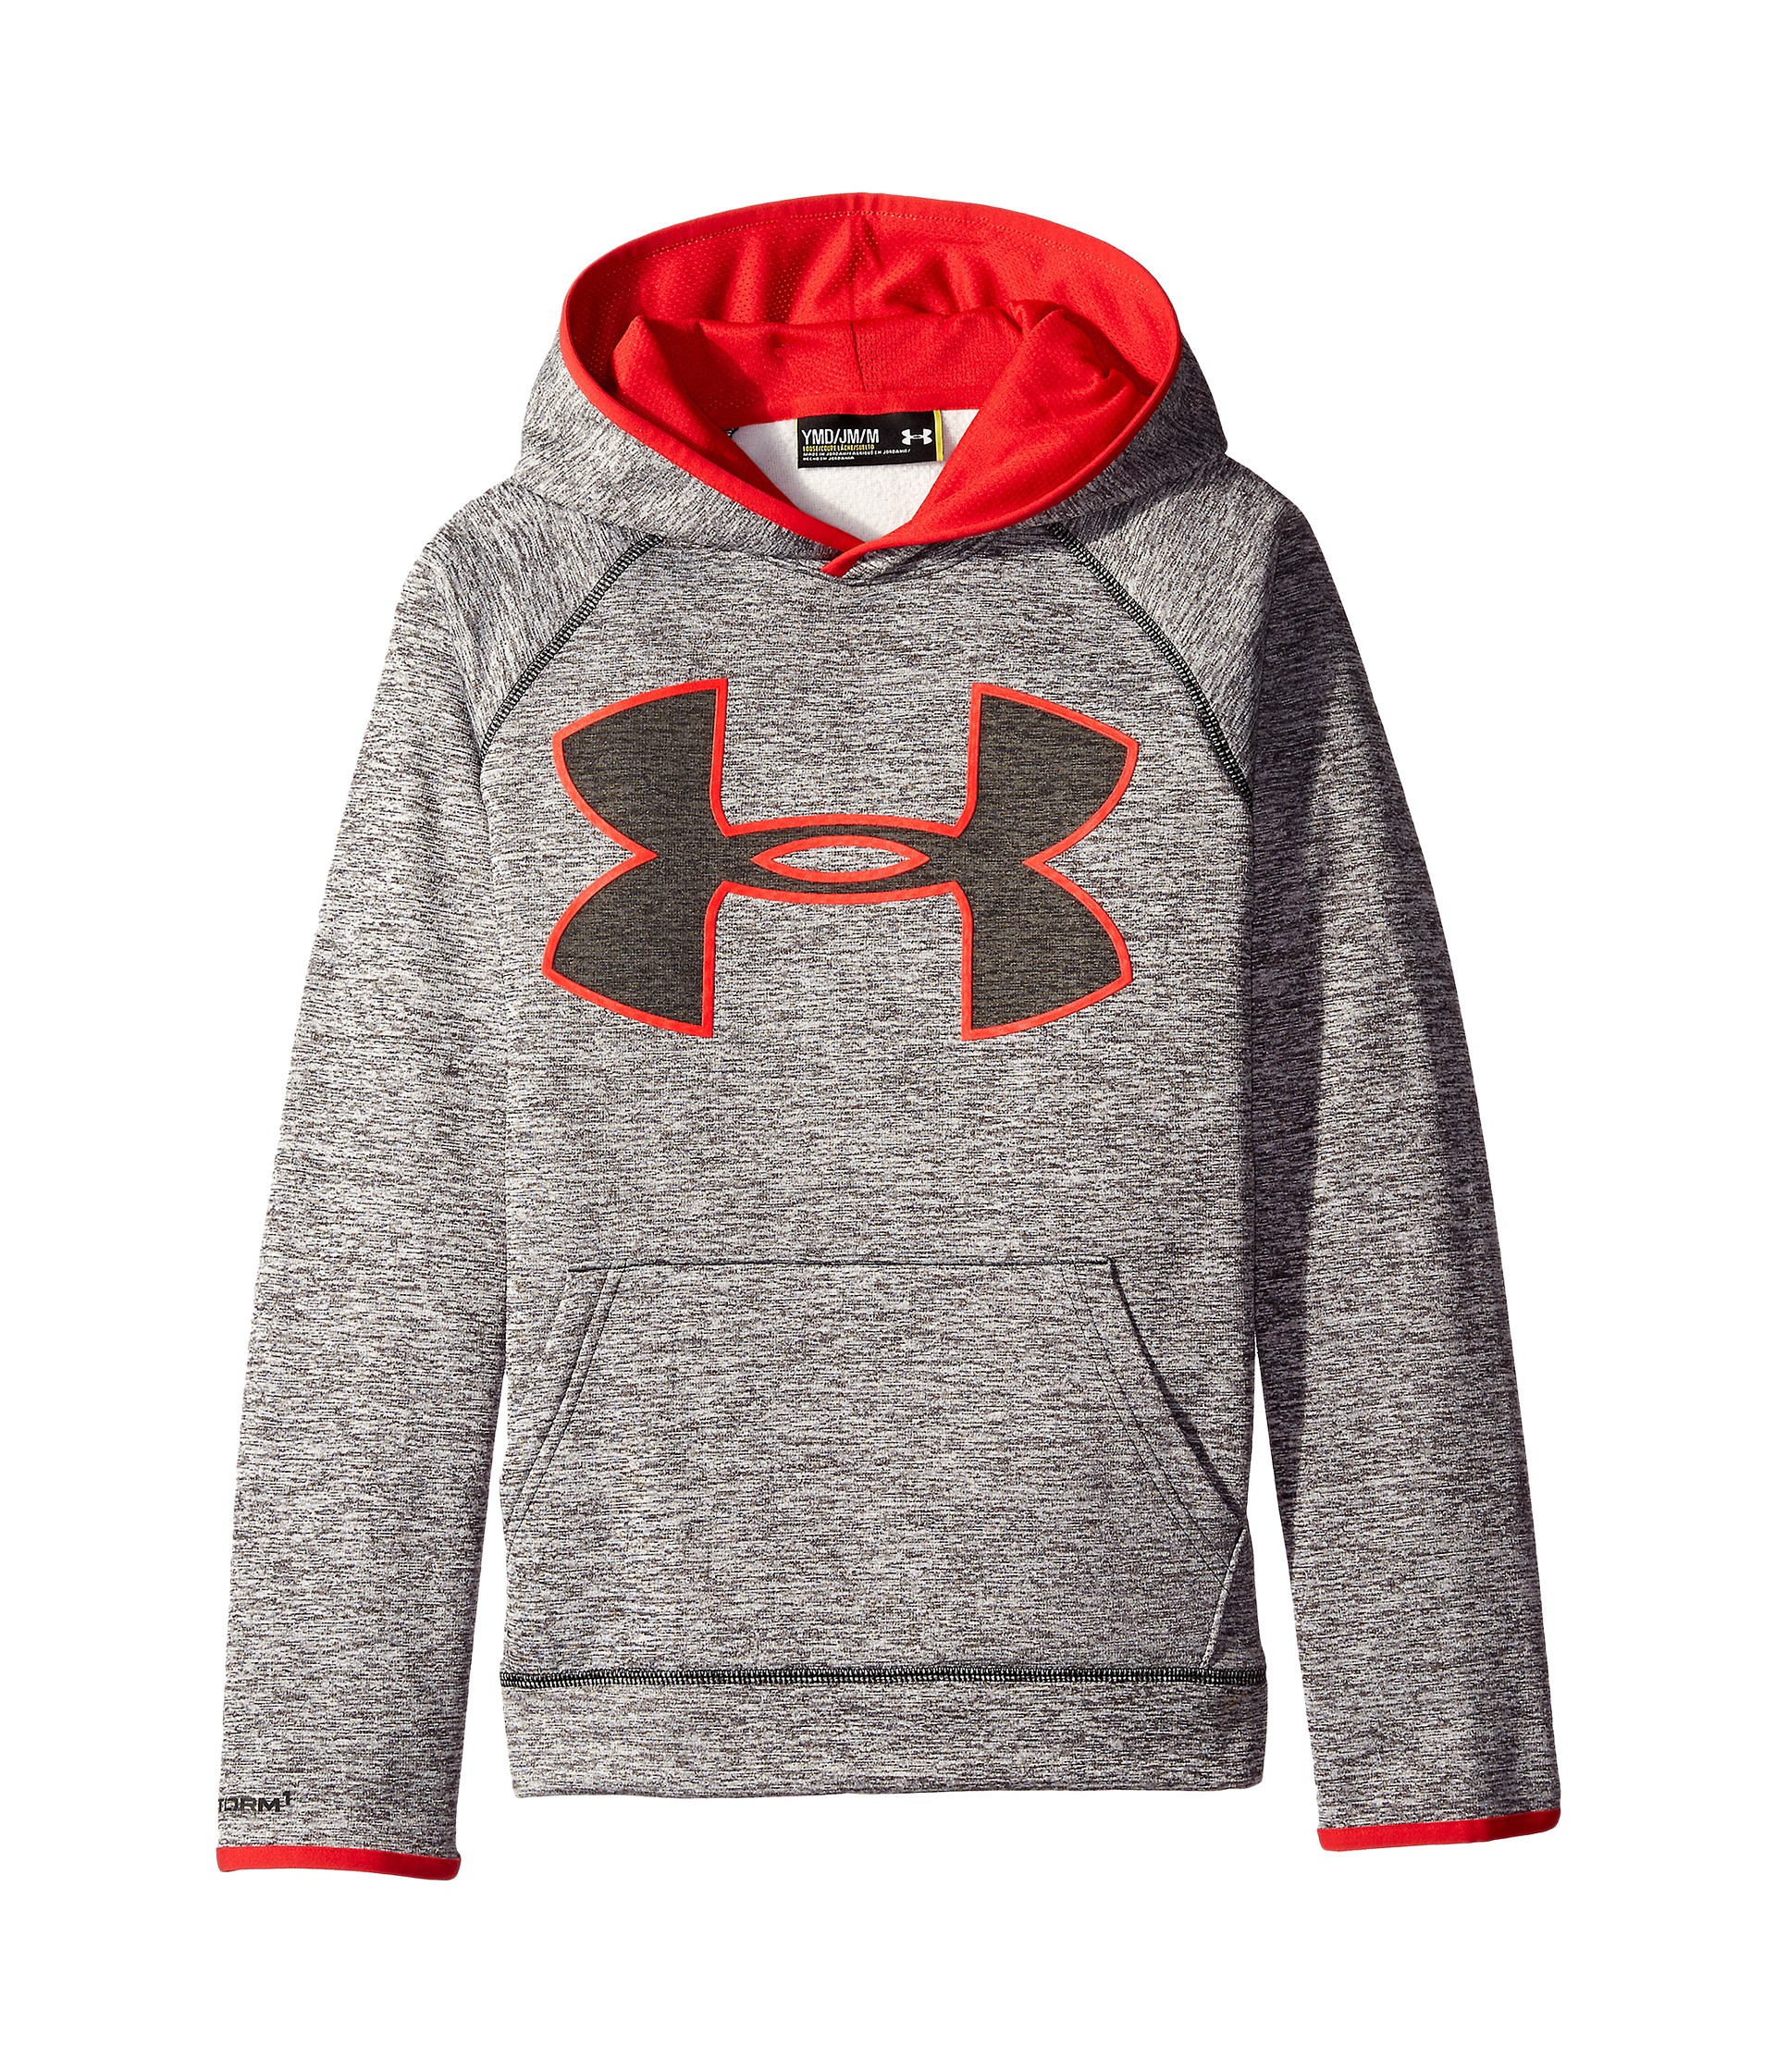 under armour youth storm jacket